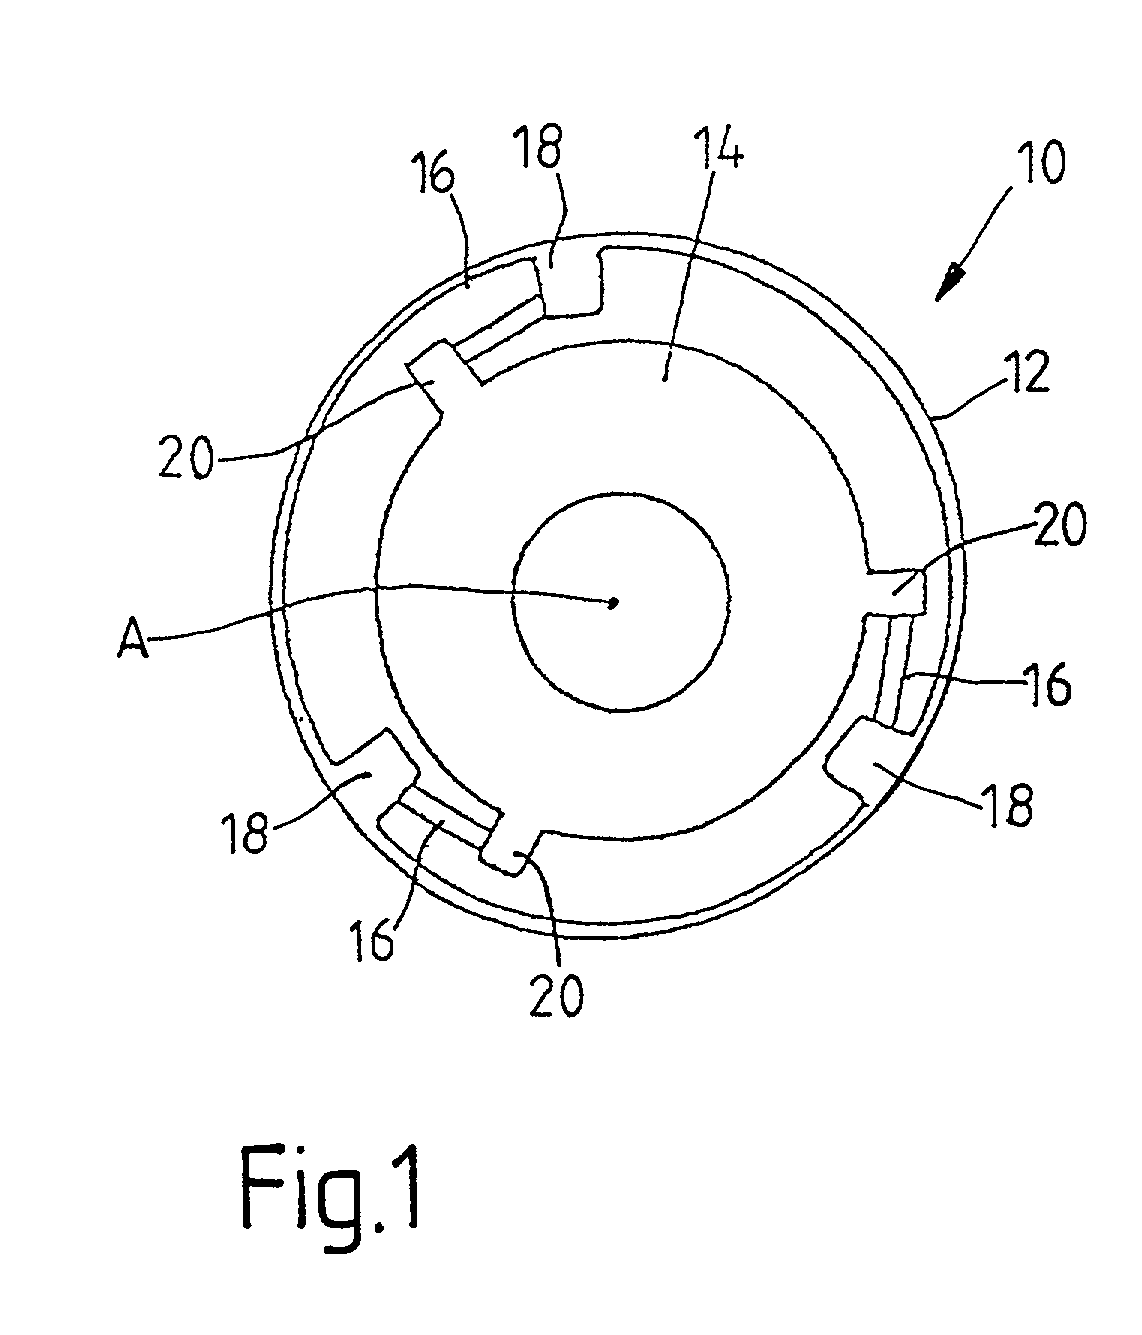 Pressure plate assembly for a friction clutch